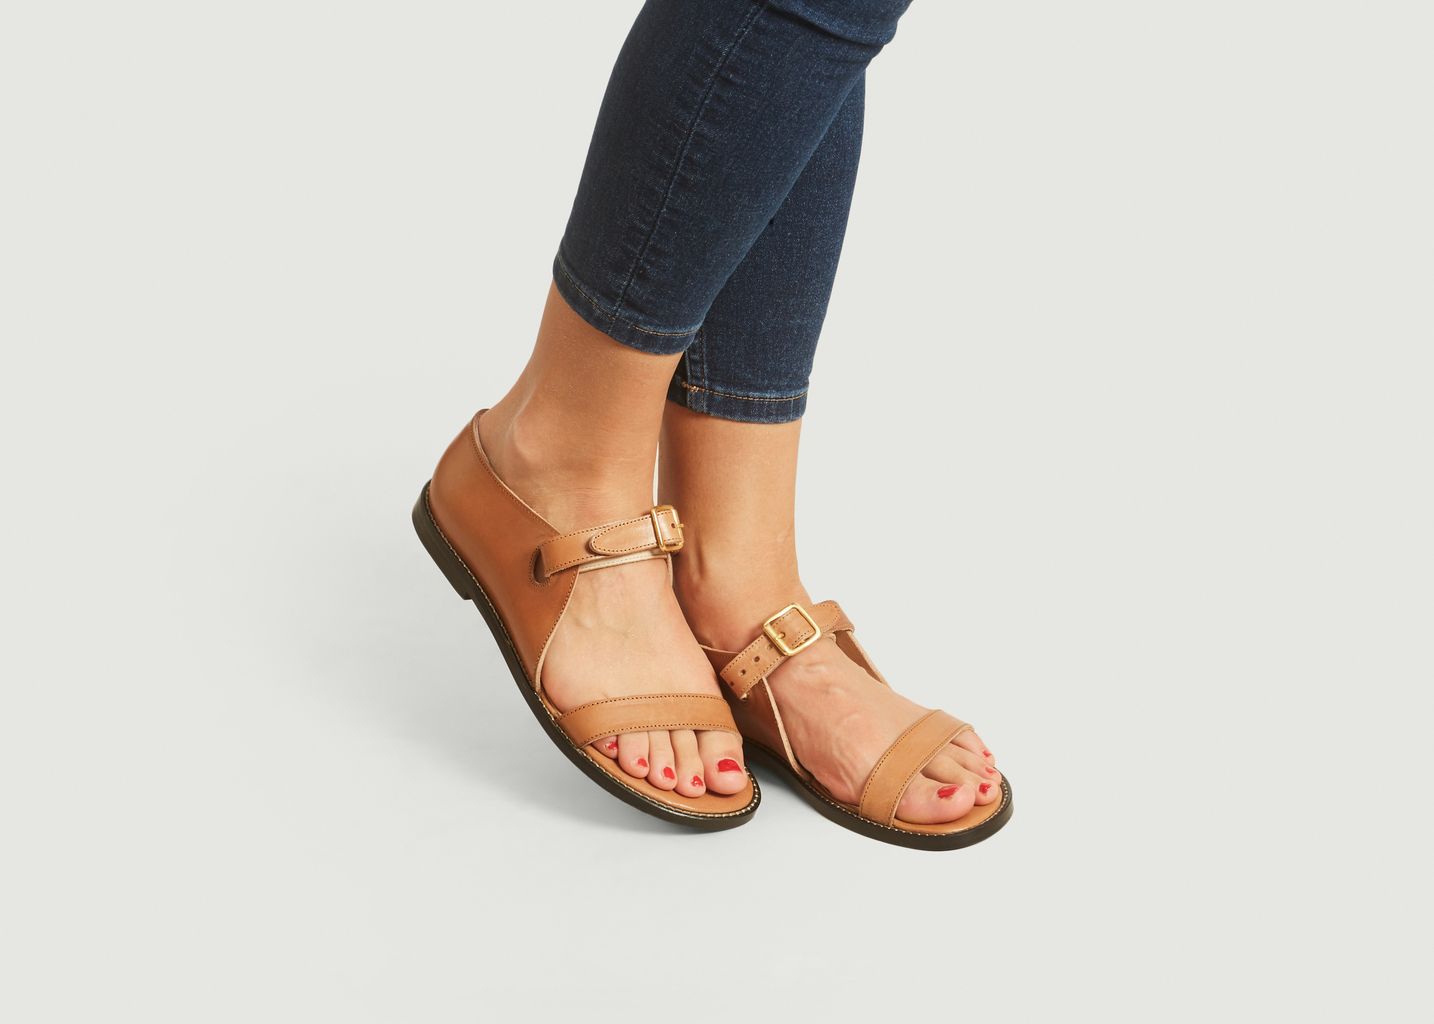 Miso Sandals - An Hour And A Shower